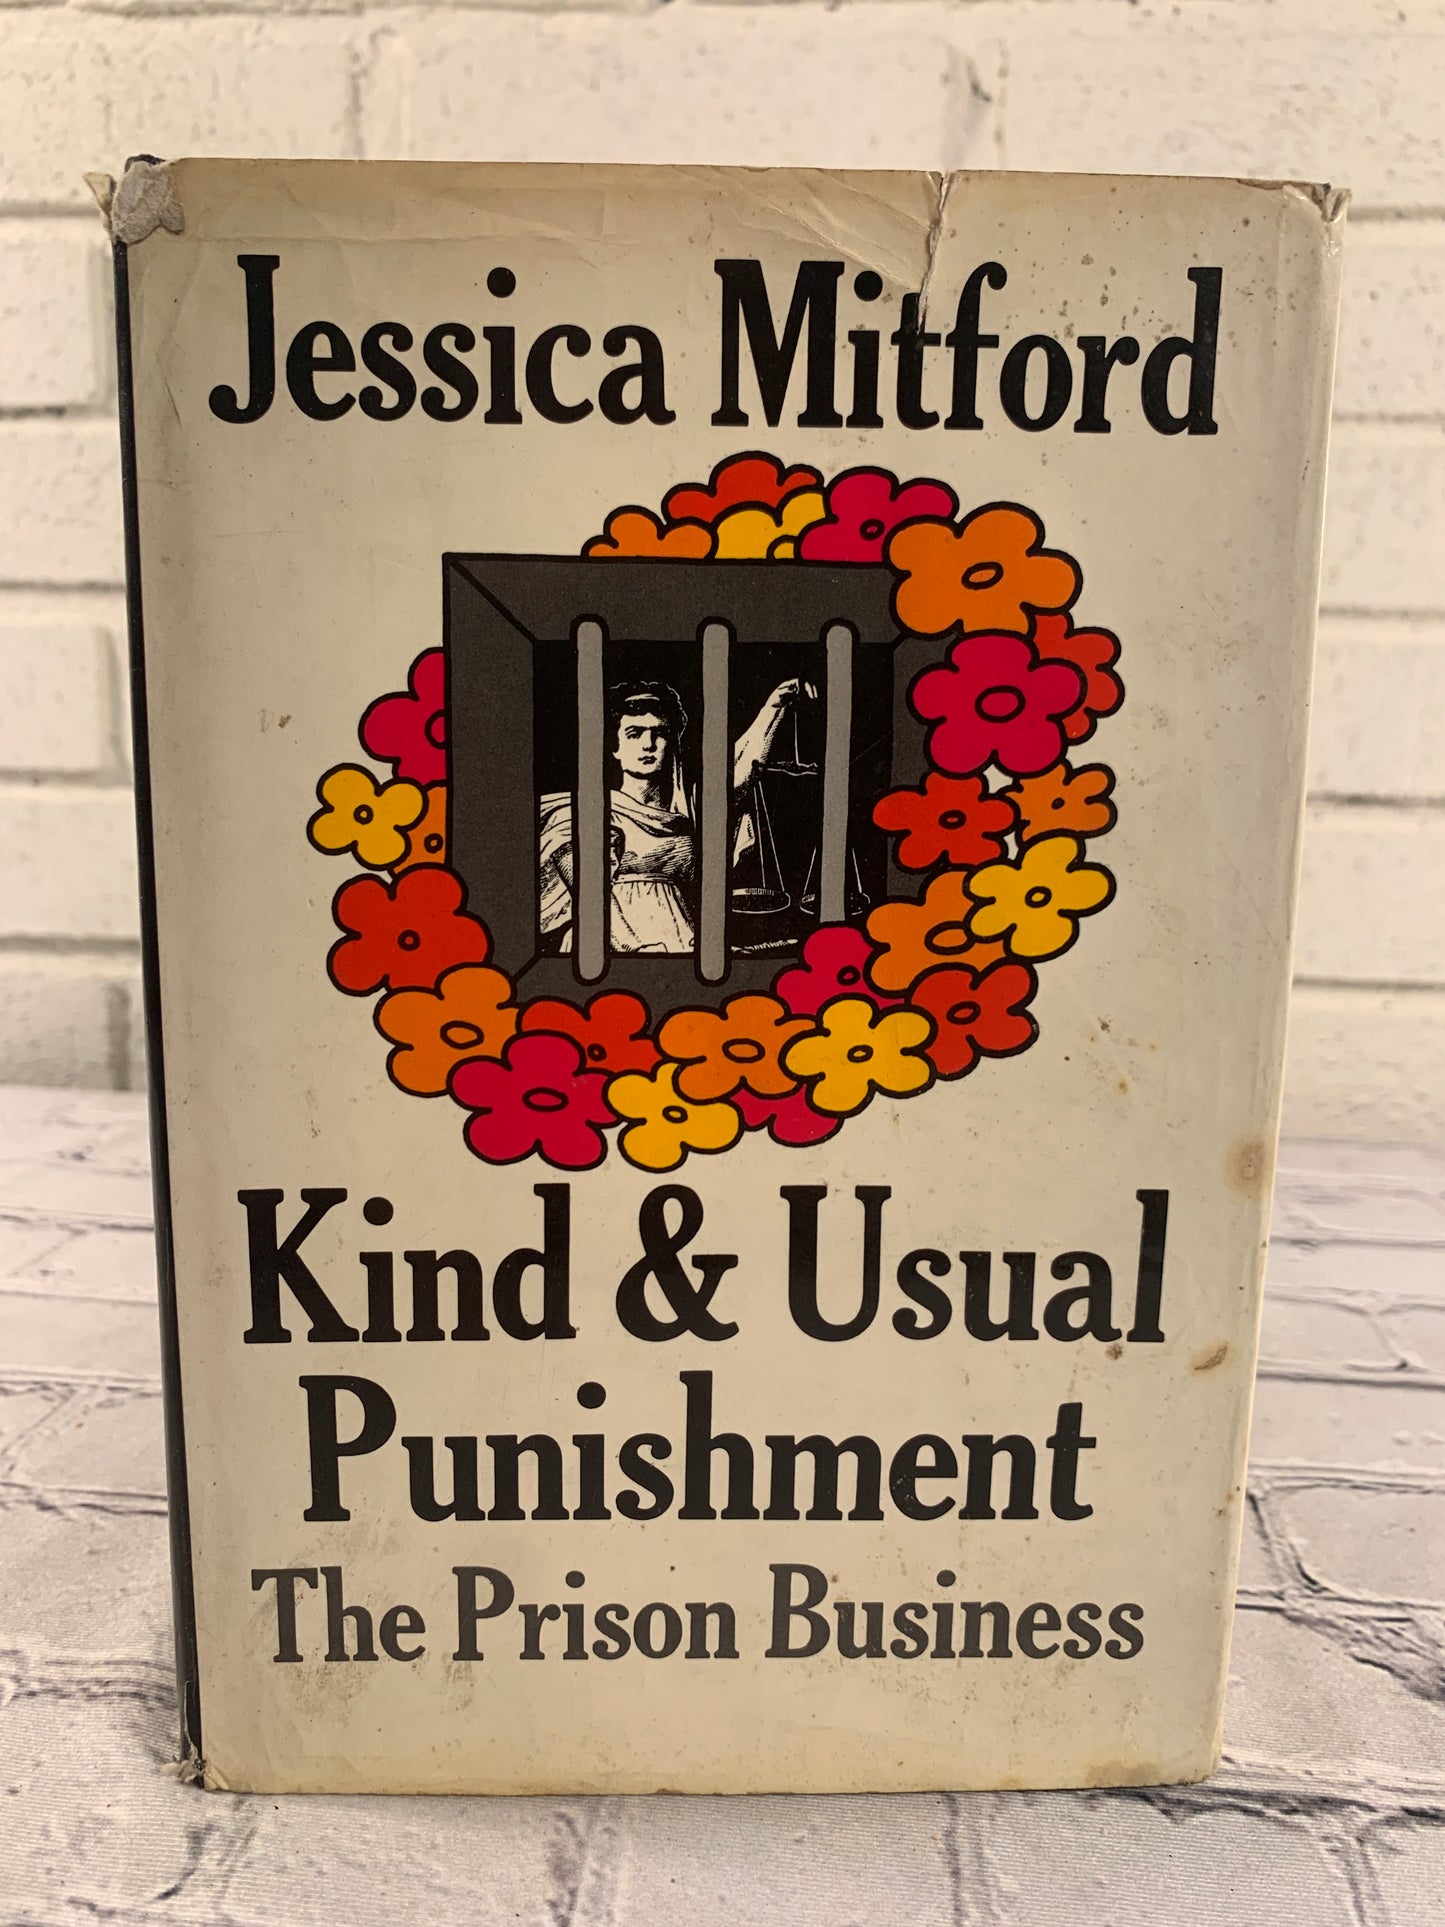 Kind & Usual Punishment The Prison Business by Jessica Mitford [1st Edition · 1973]